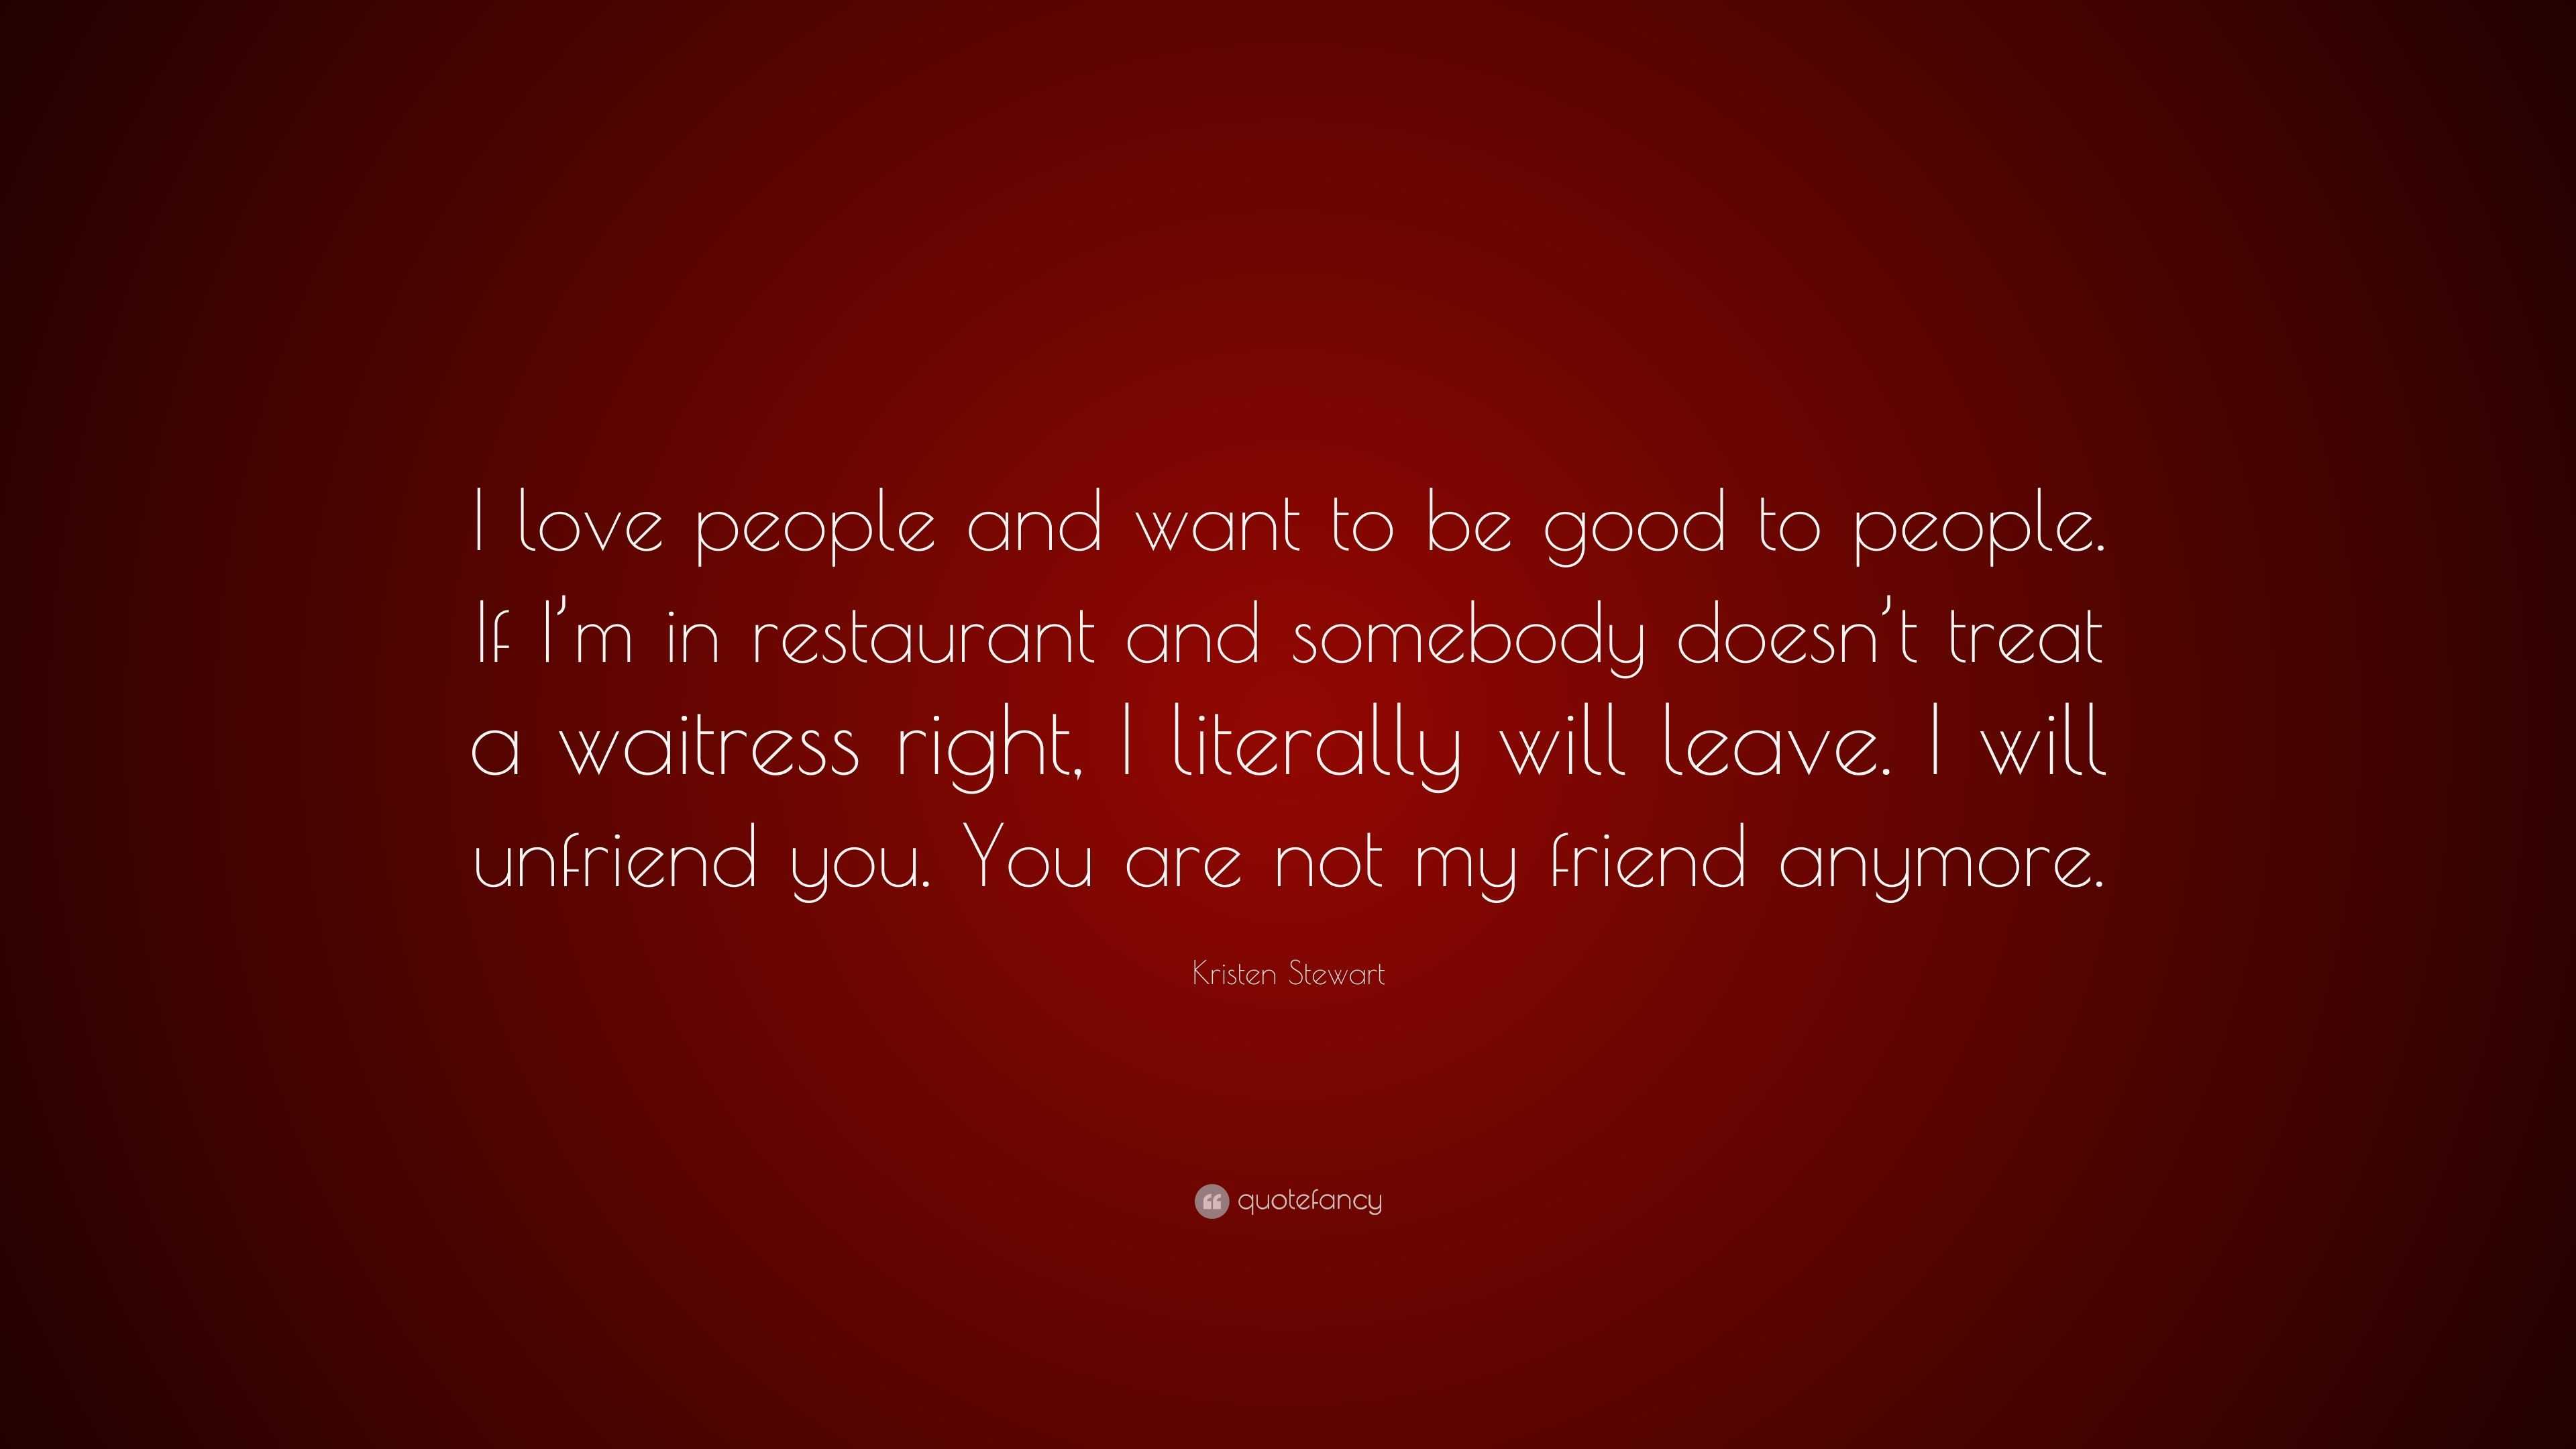 Kristen Stewart Quote: "I love people and want to be good ...